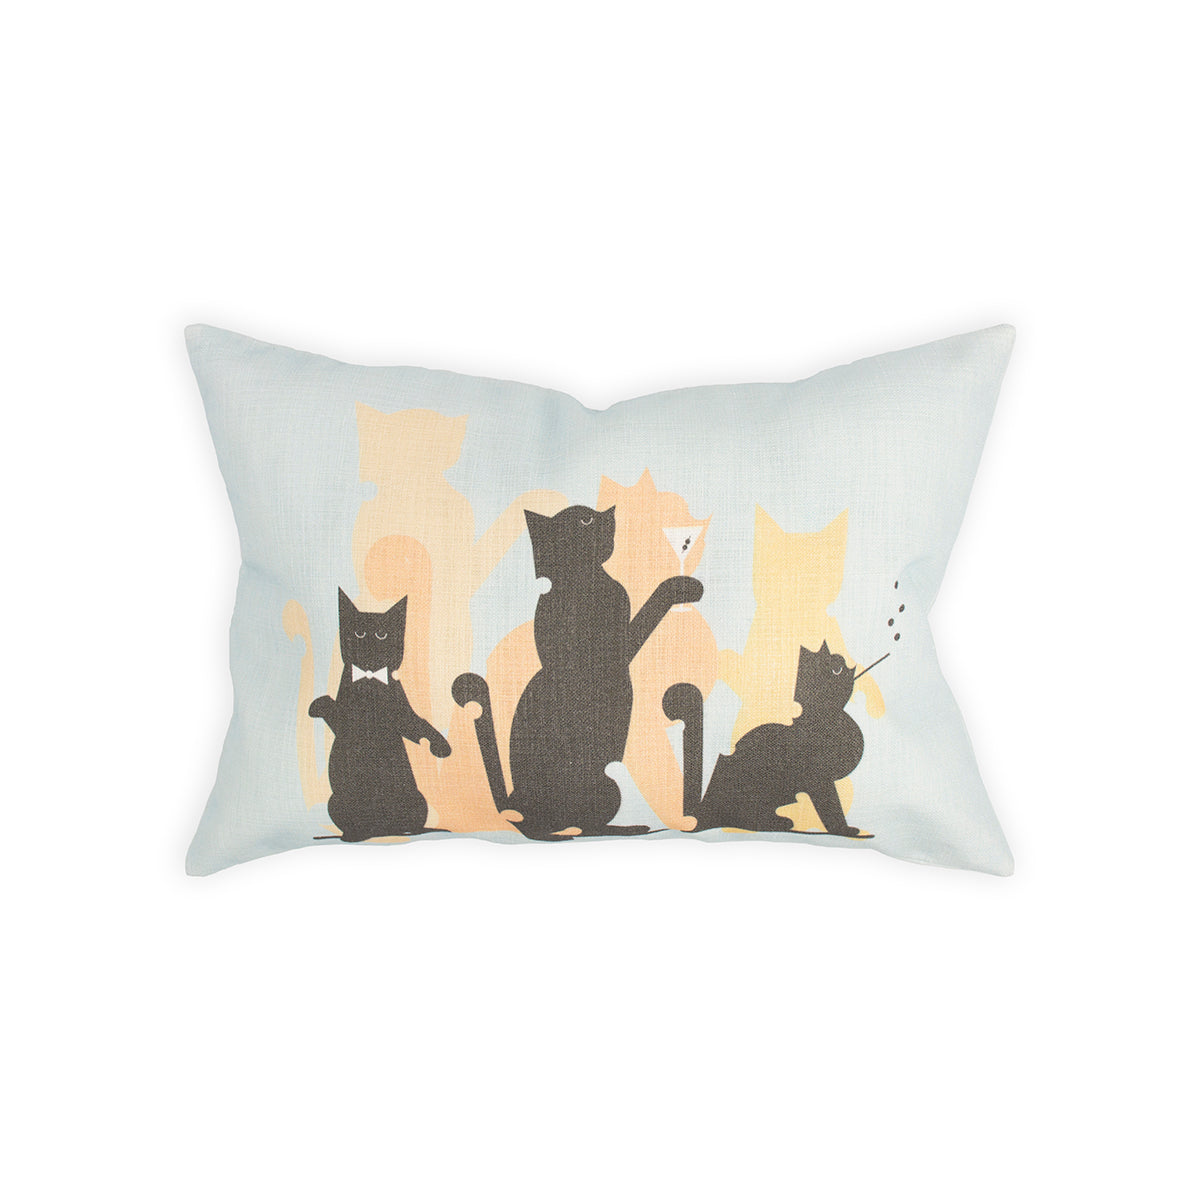 14" x 20" 100% cotton pillow cover in light grey featuring three silhouettes of cats in black and shades of orange